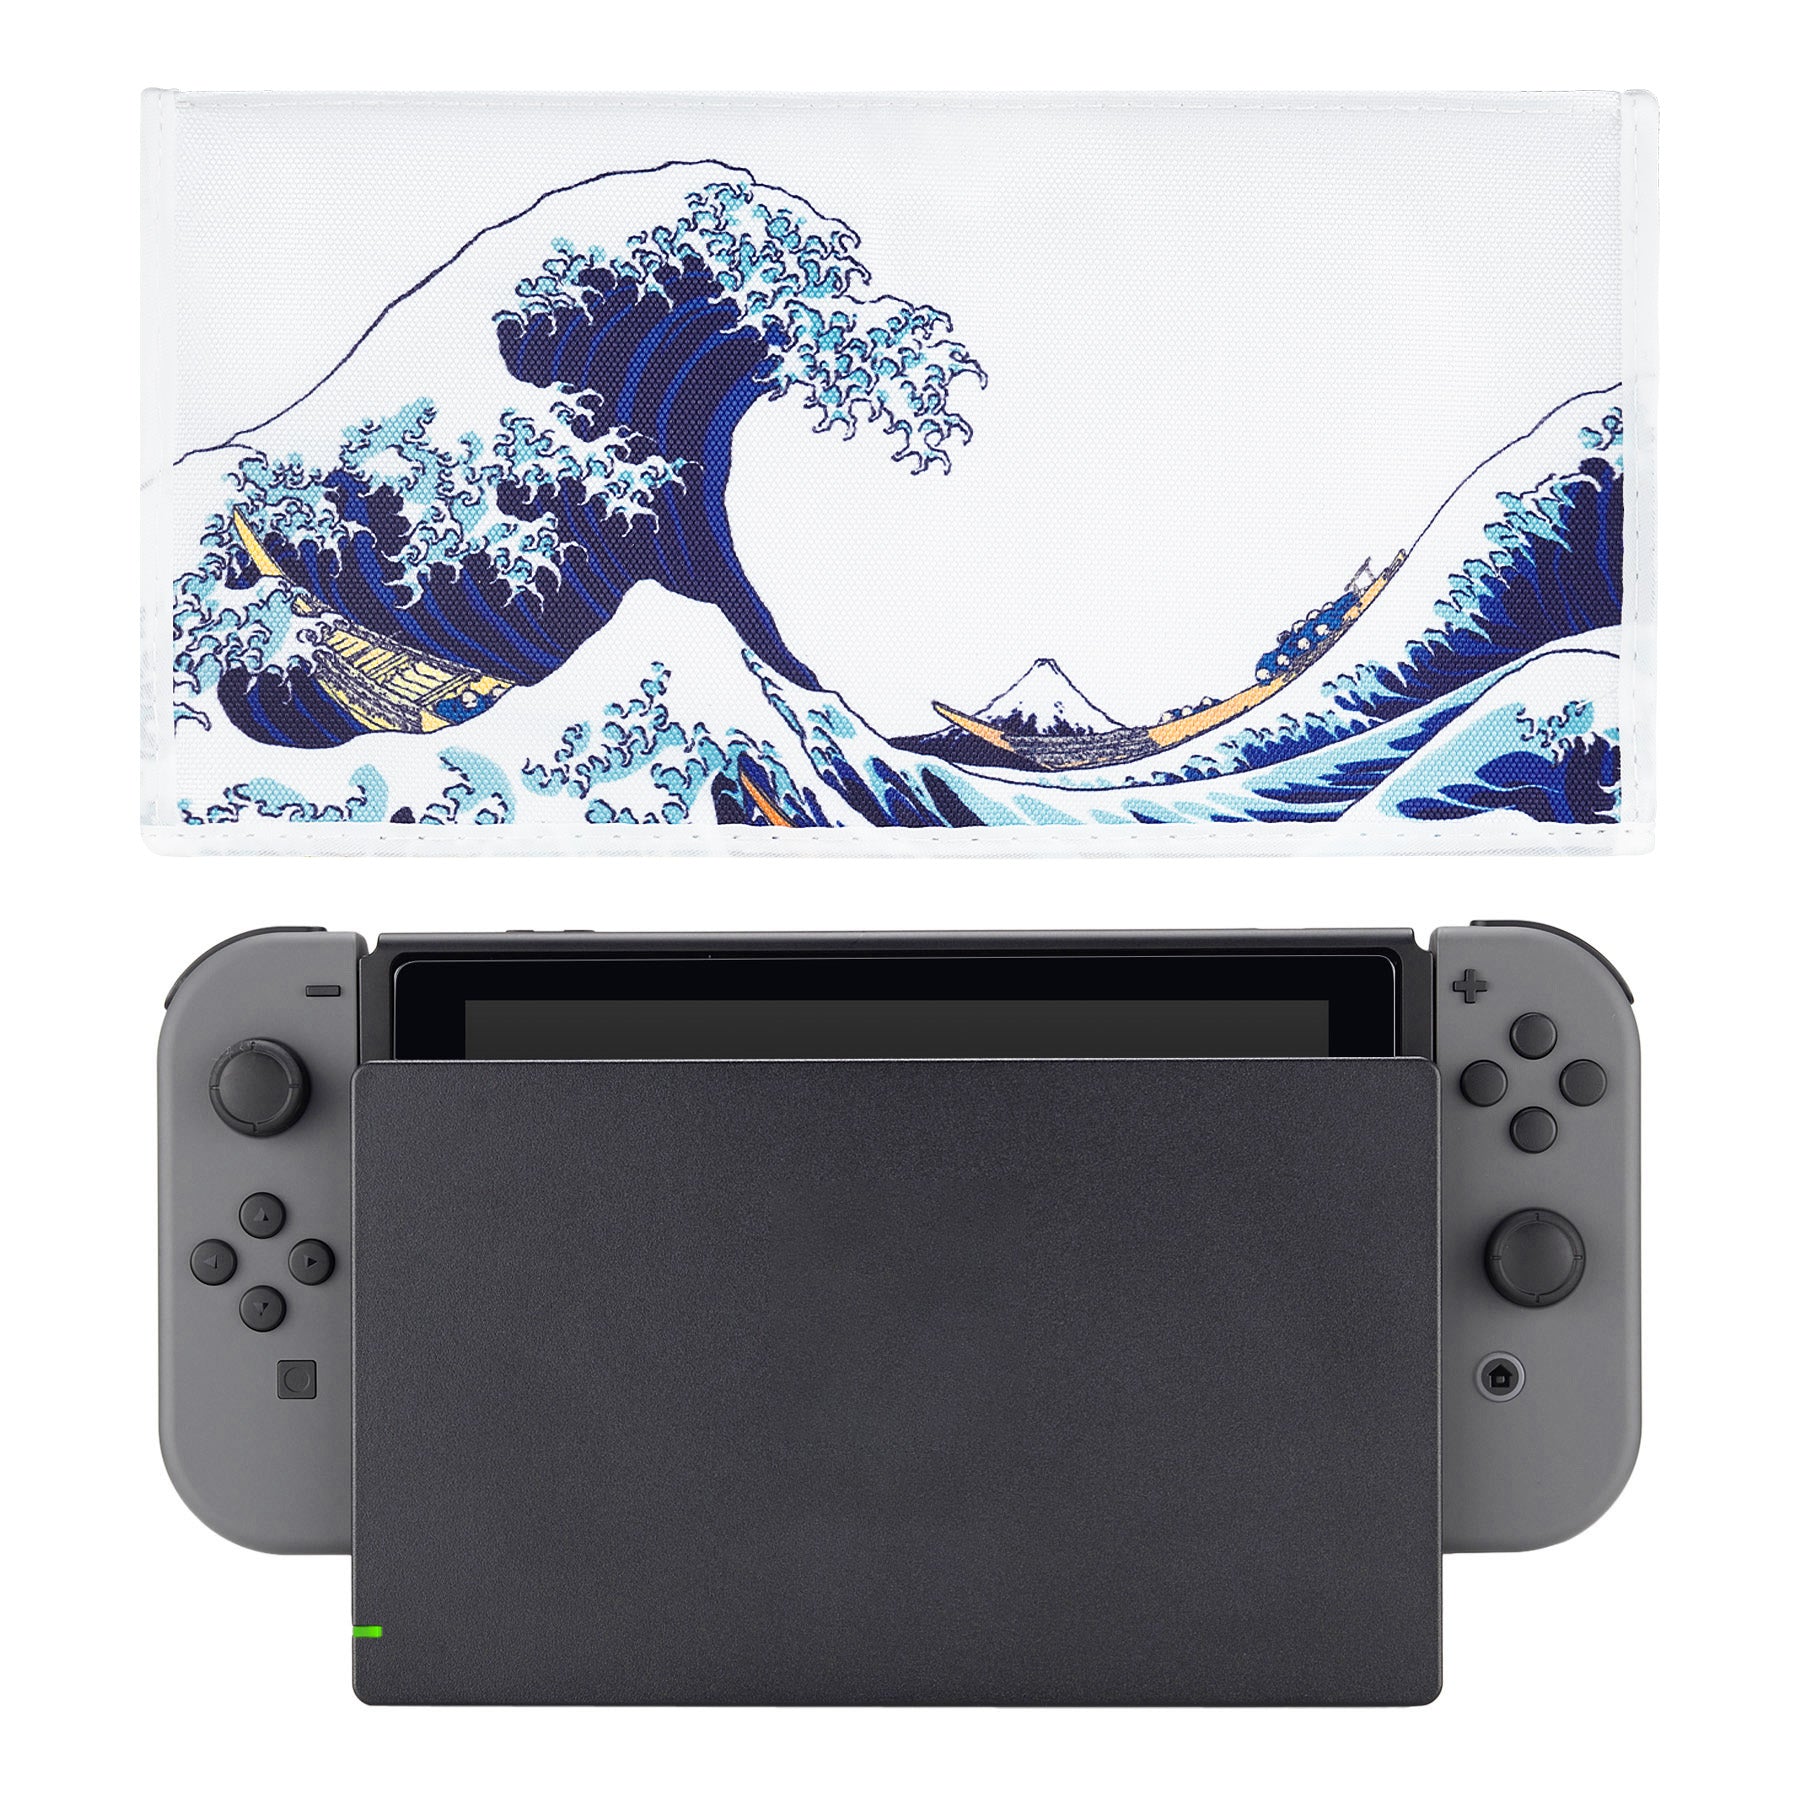 PlayVital Nylon Dust Cover, Soft Neat Lining Dust Guard, Anti Scratch Waterproof Cover Sleeve for Nintendo Switch & Switch OLED Charging Dock - The Great Wave - NTA8011 PlayVital